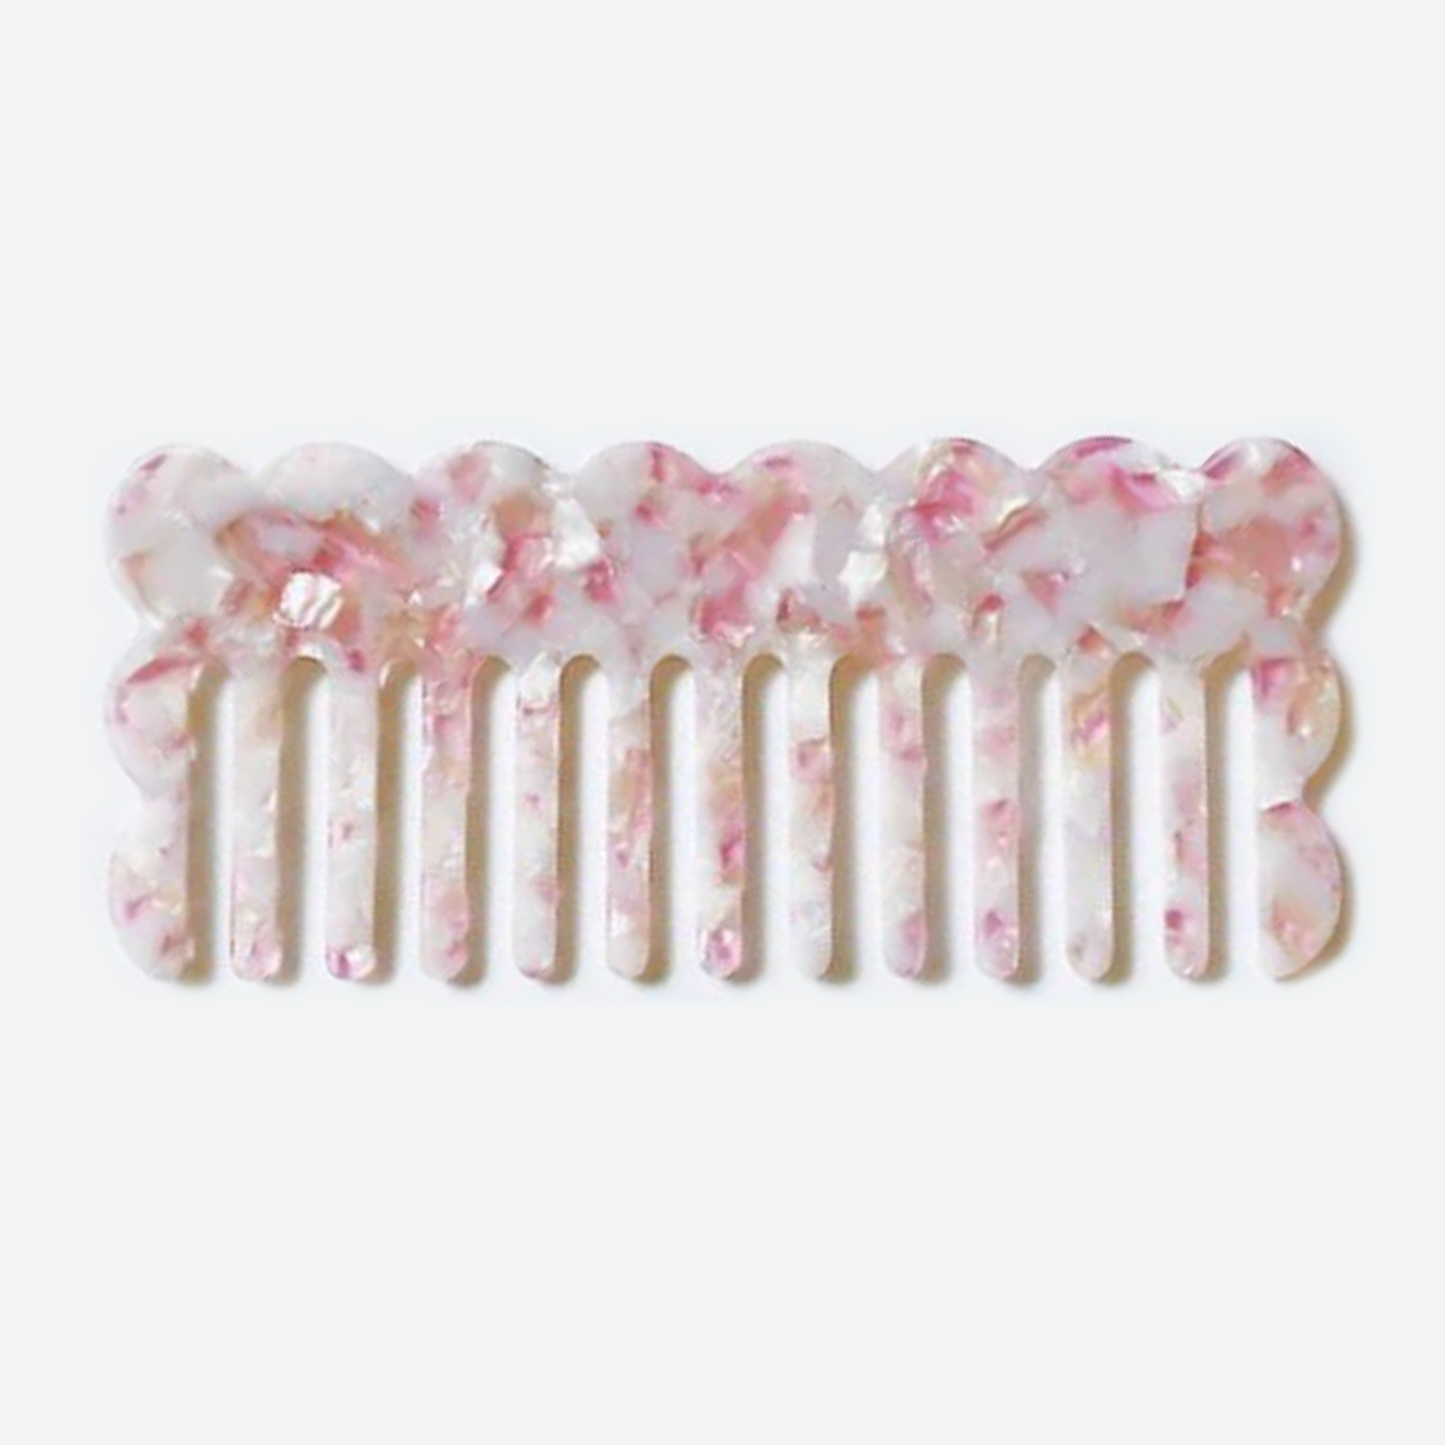 Buy Blush Wide Tooth Comb - House Of Hair New Zealand Haircare